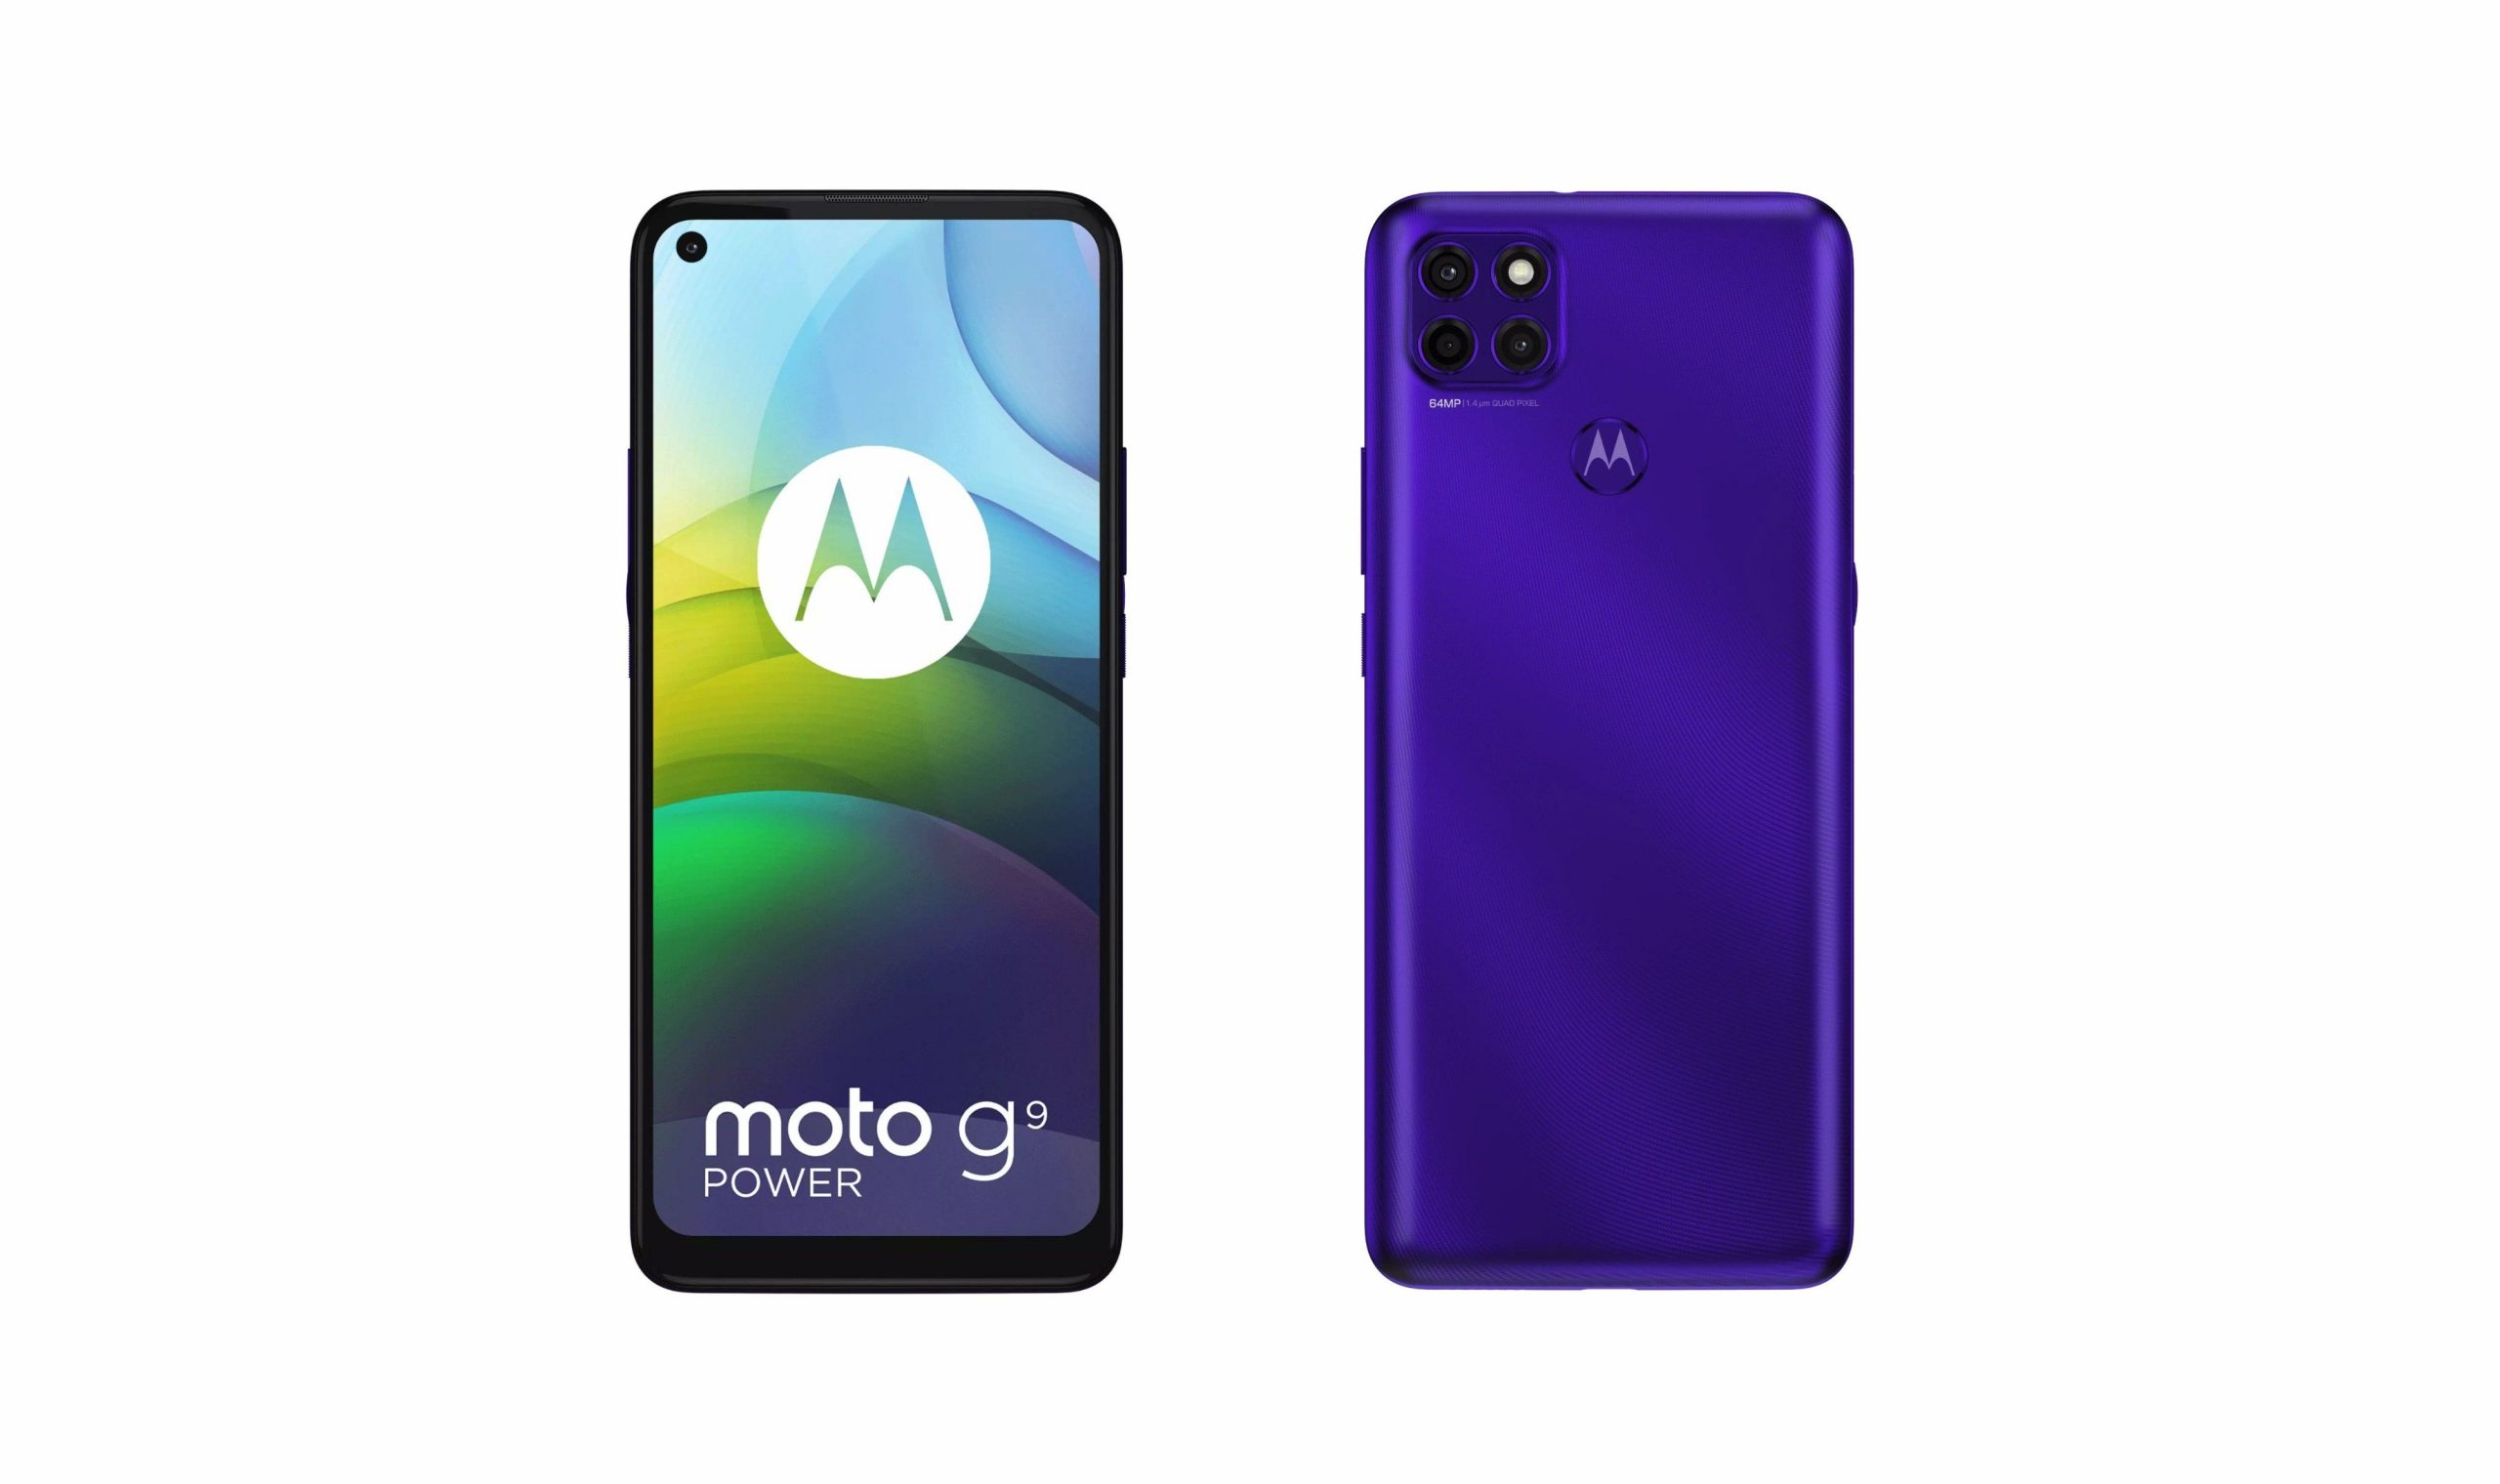 Motorola Moto G9 Power goes official with 6000mAh battery